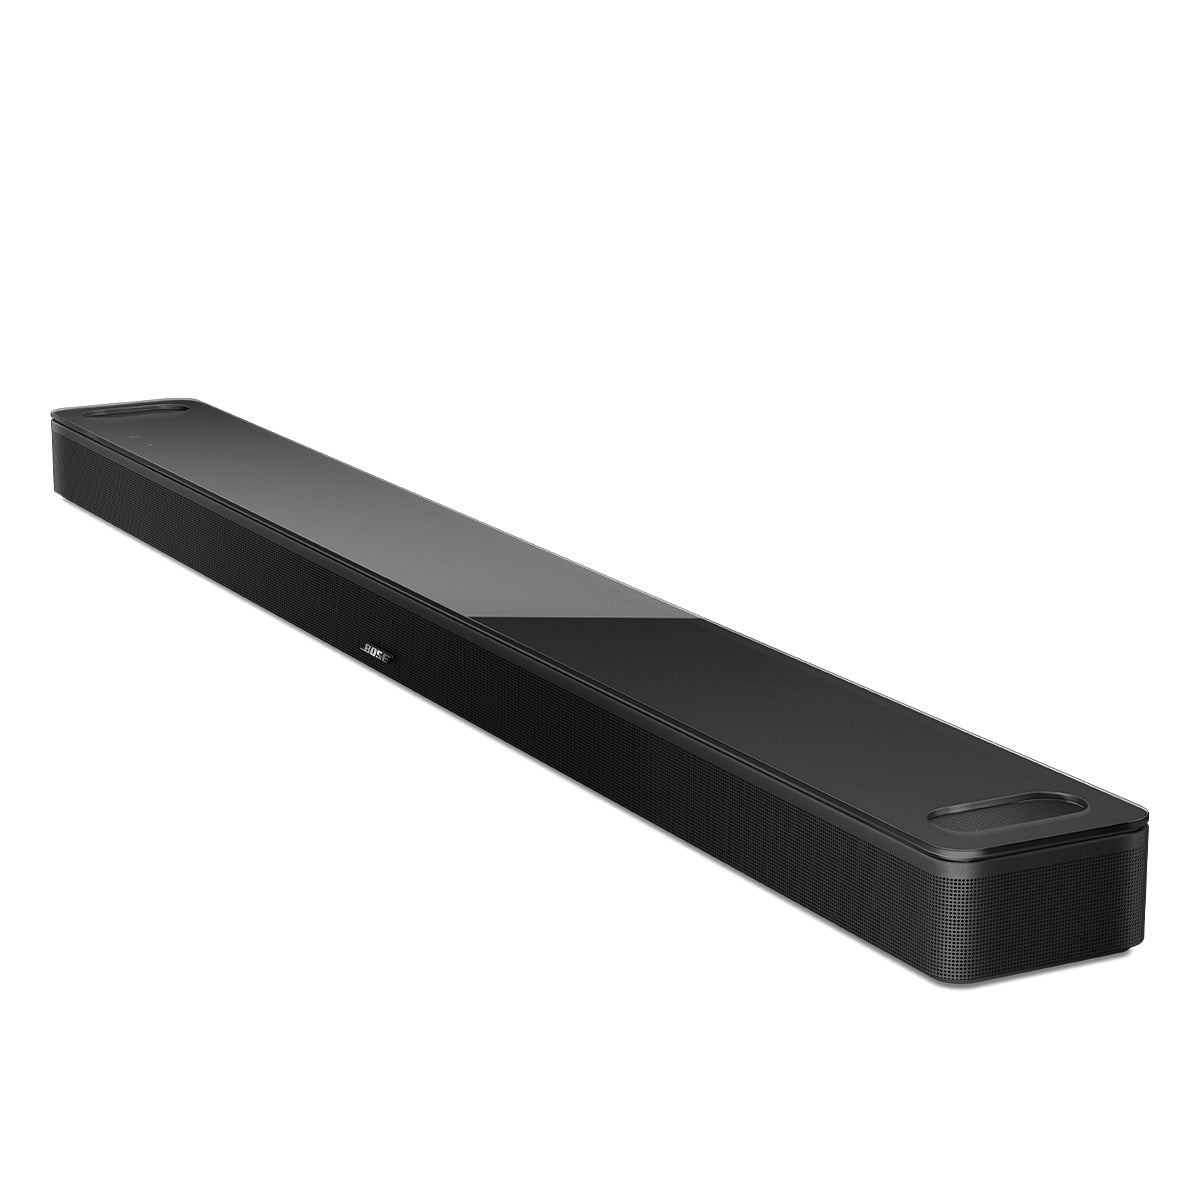 Bose Smart Atmos Voice World 900 Alexa (Black) Wide Stereo | and with Google Soundbar Dolby Control Assistant